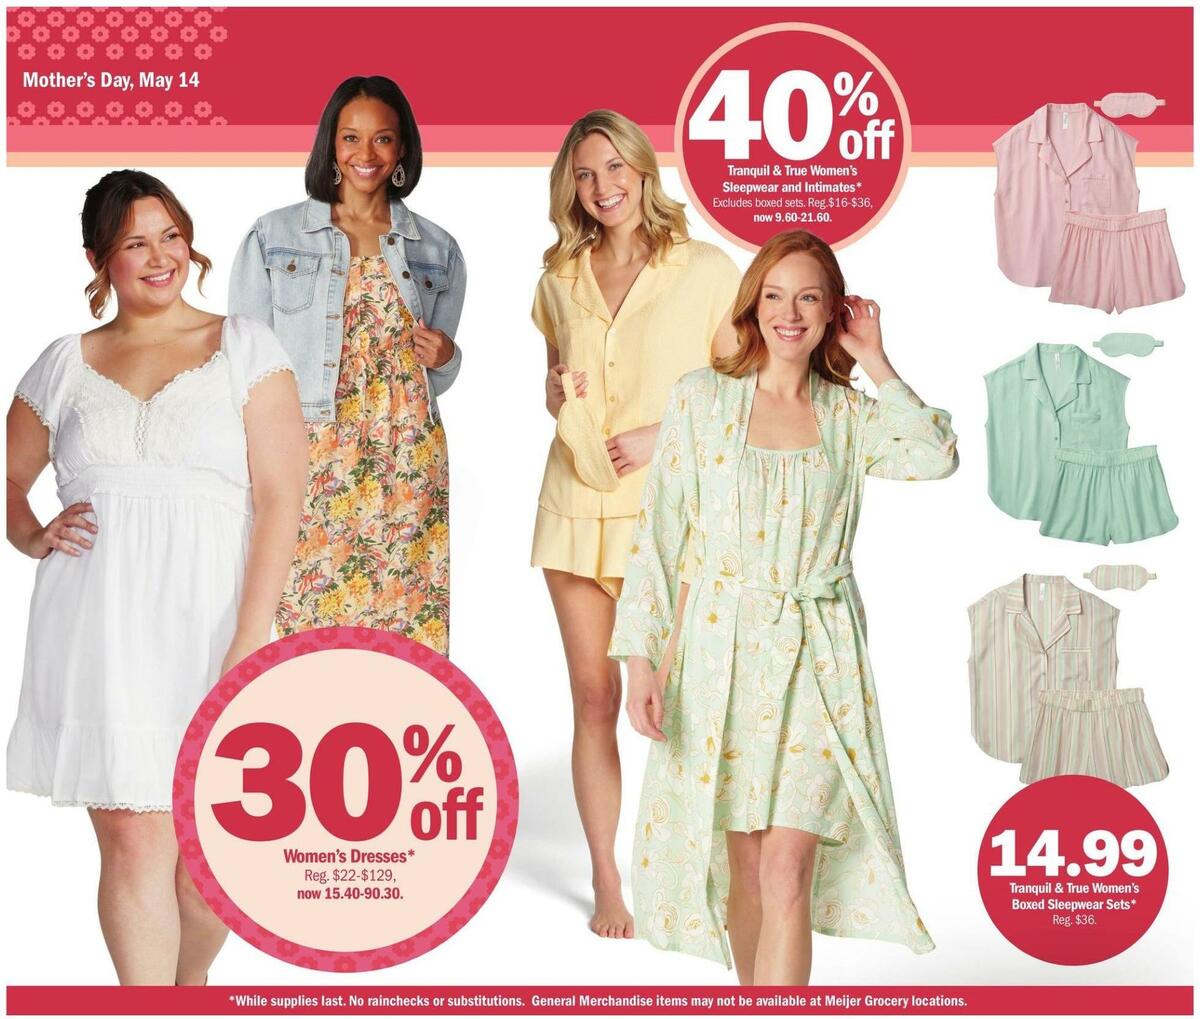 Meijer Mother's Day Weekly Ad from May 7